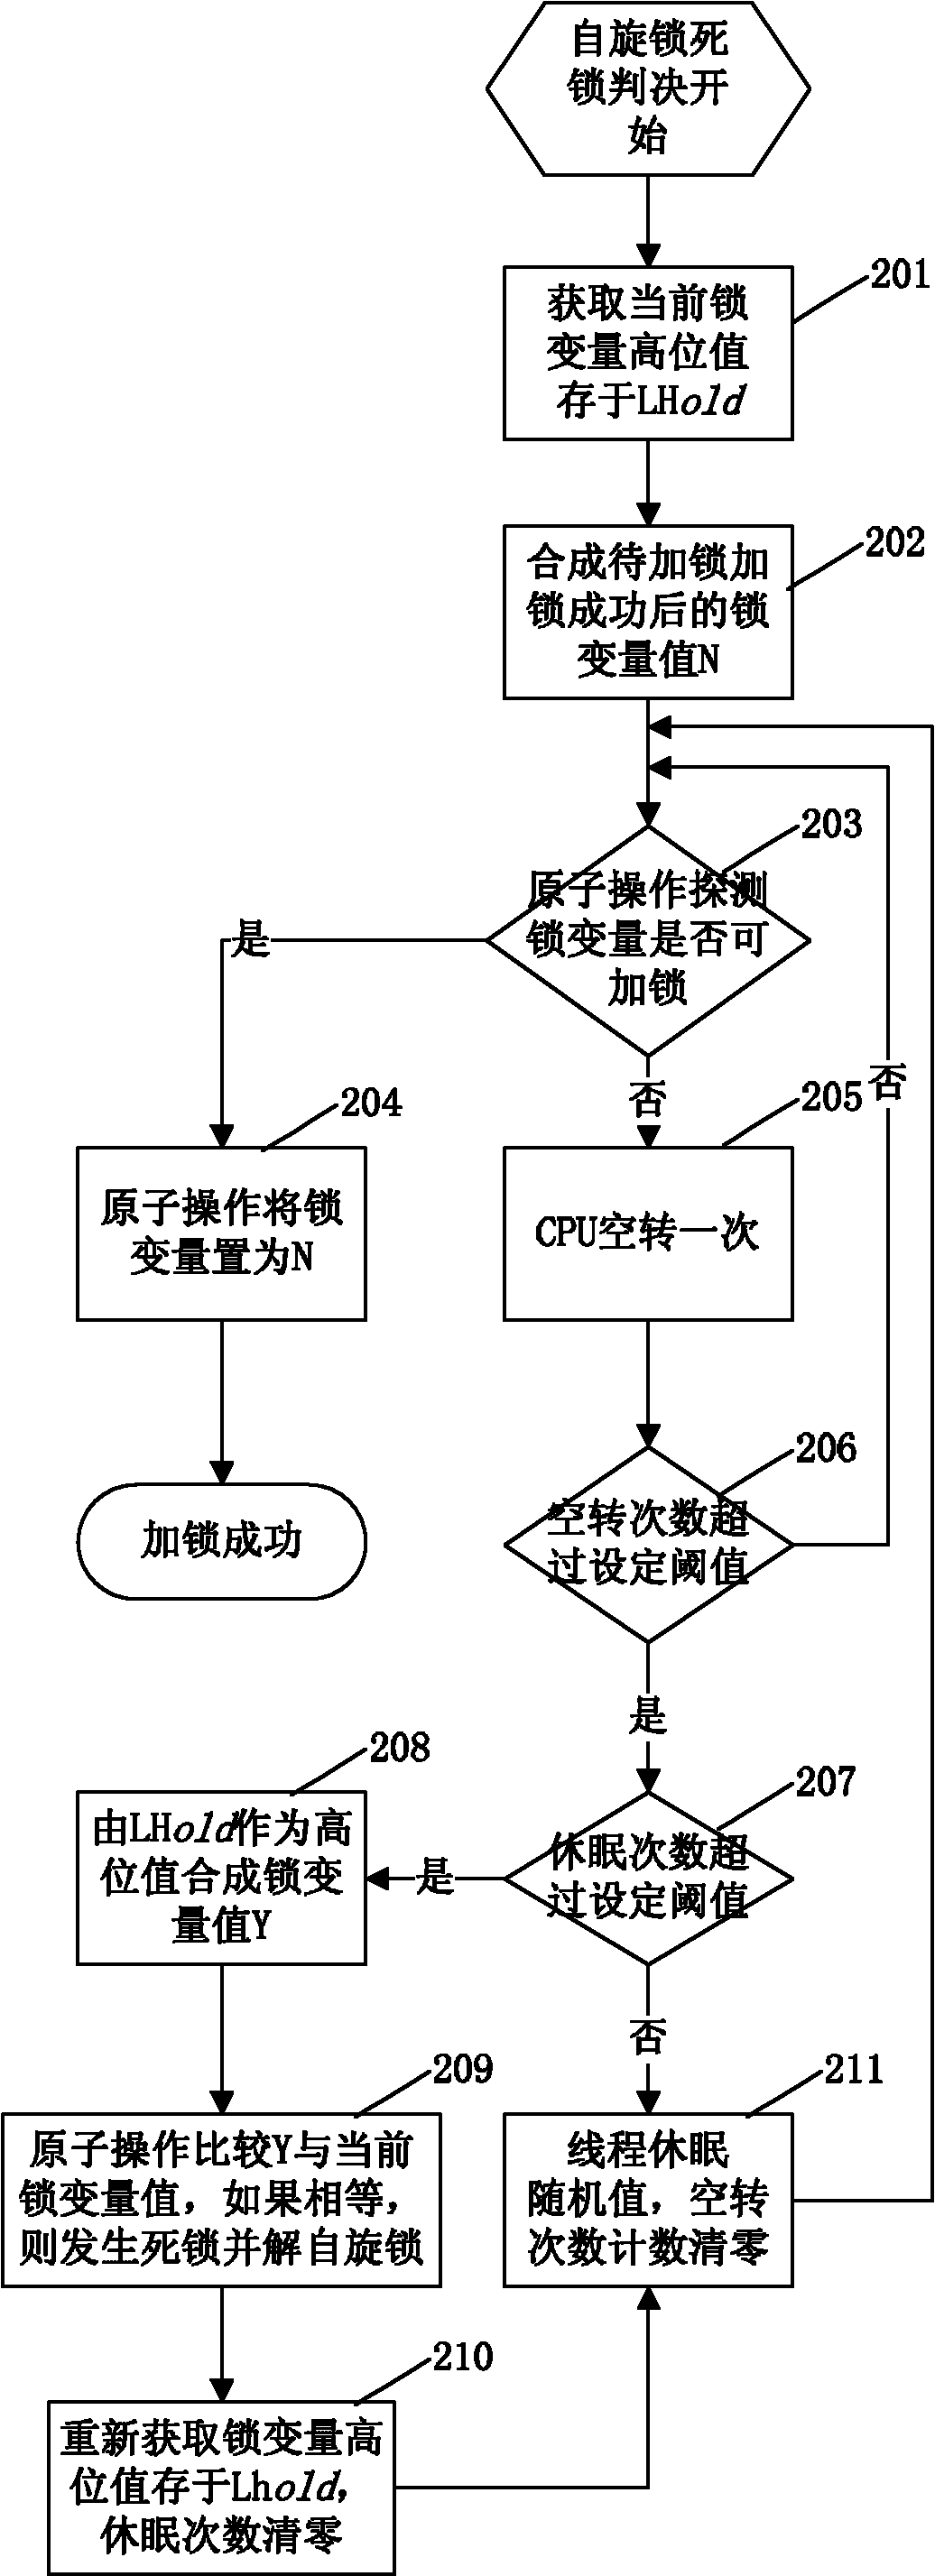 Method for implementing spin lock in database